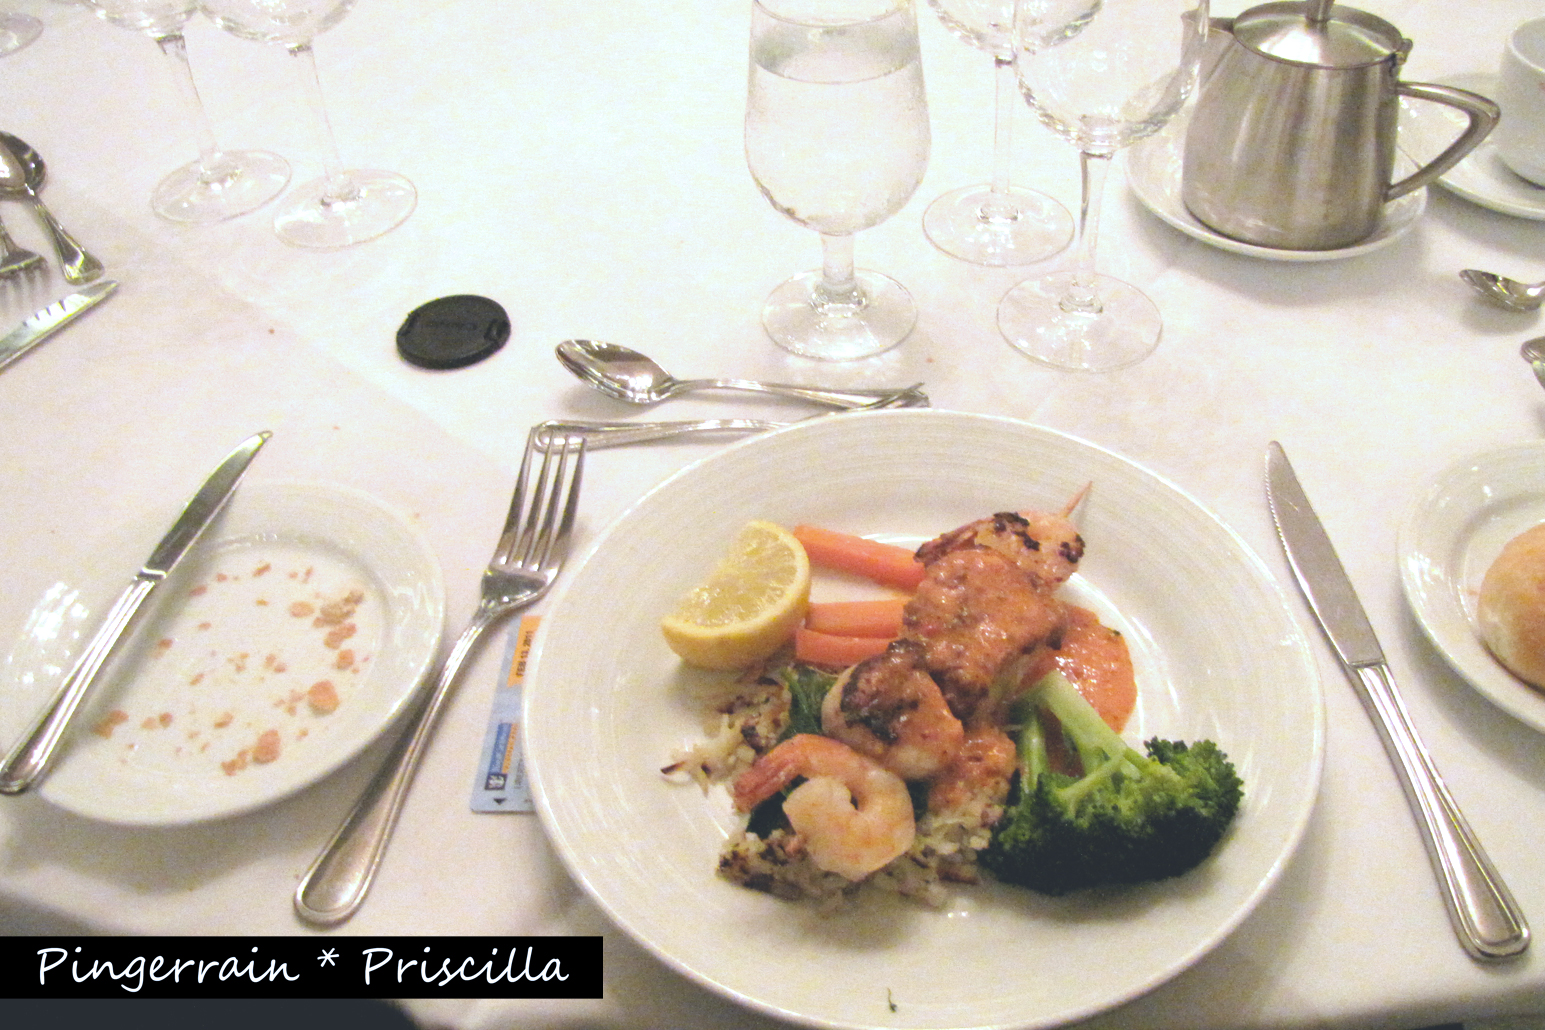 Royal Caribbean’s Liberty of the Seas: Fine Dining at Michelangelo